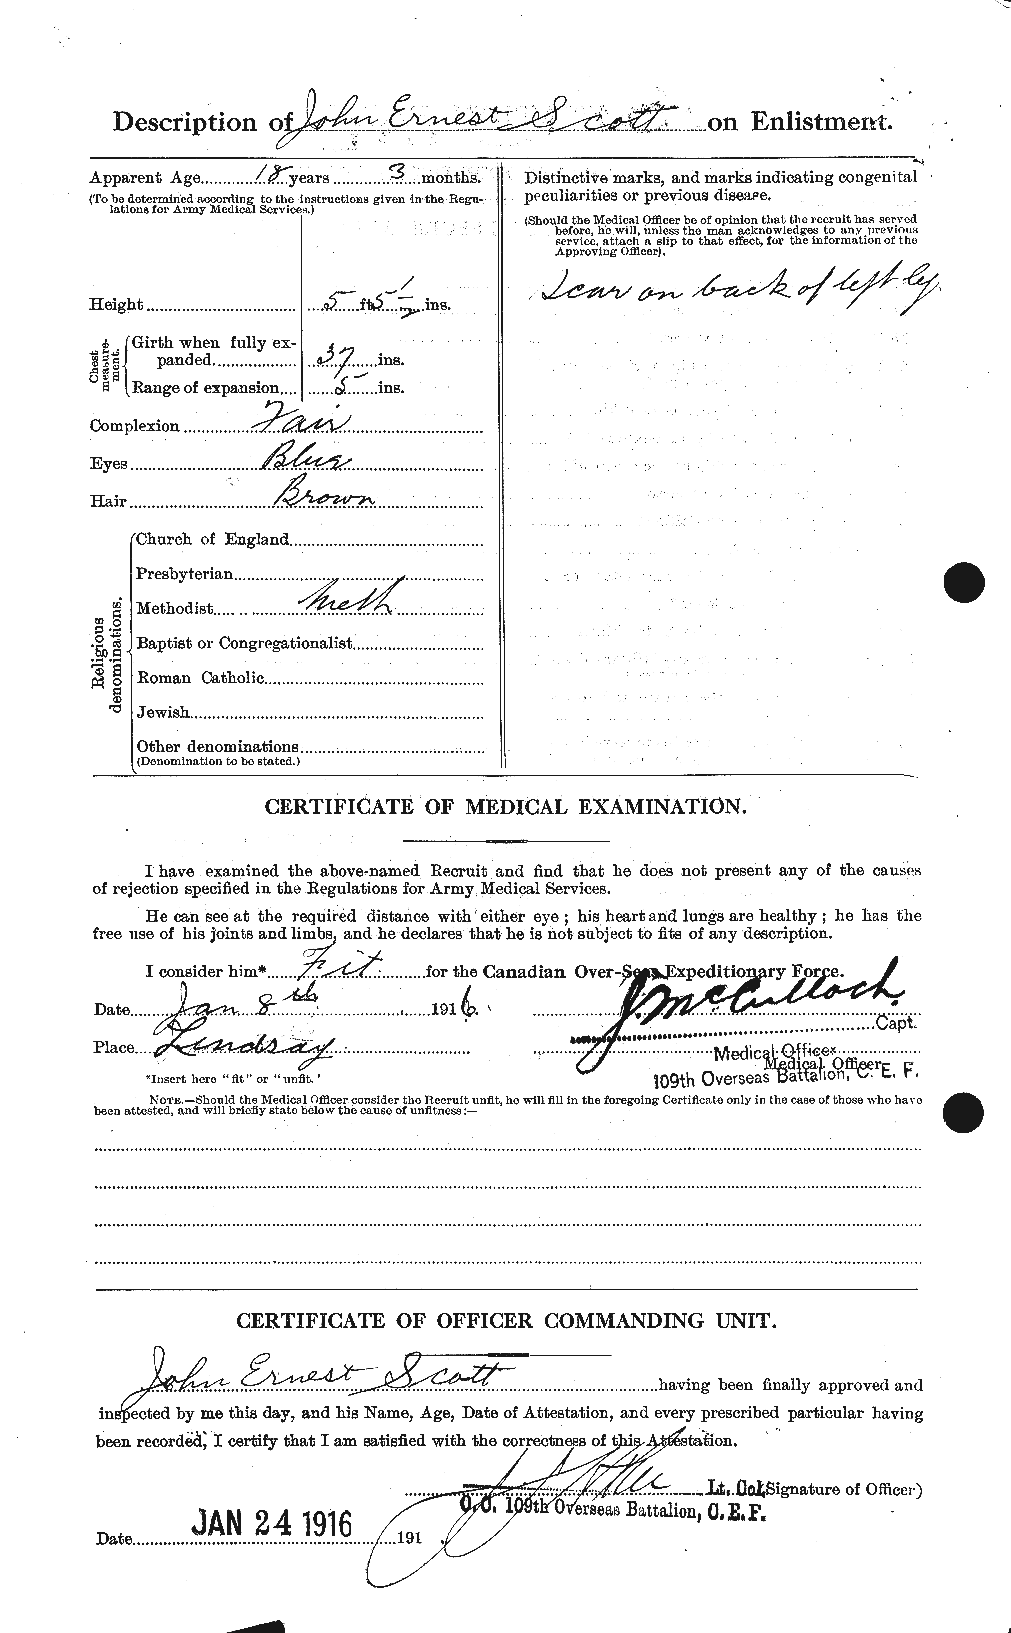 Personnel Records of the First World War - CEF 084630b